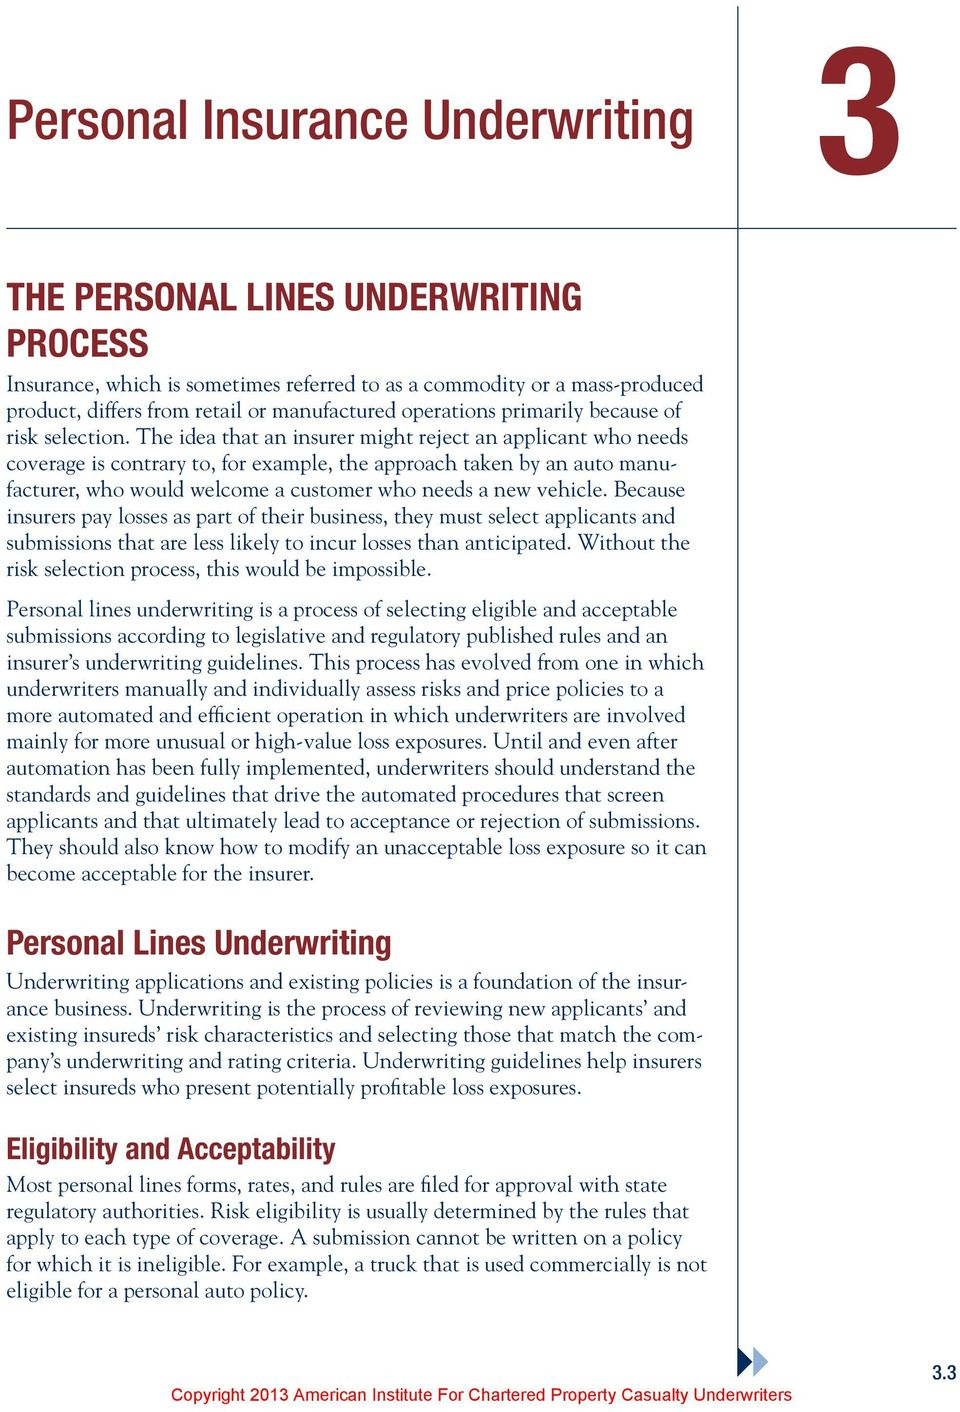 Personal Insurance Underwriting Pdf Free Download with regard to sizing 960 X 1412